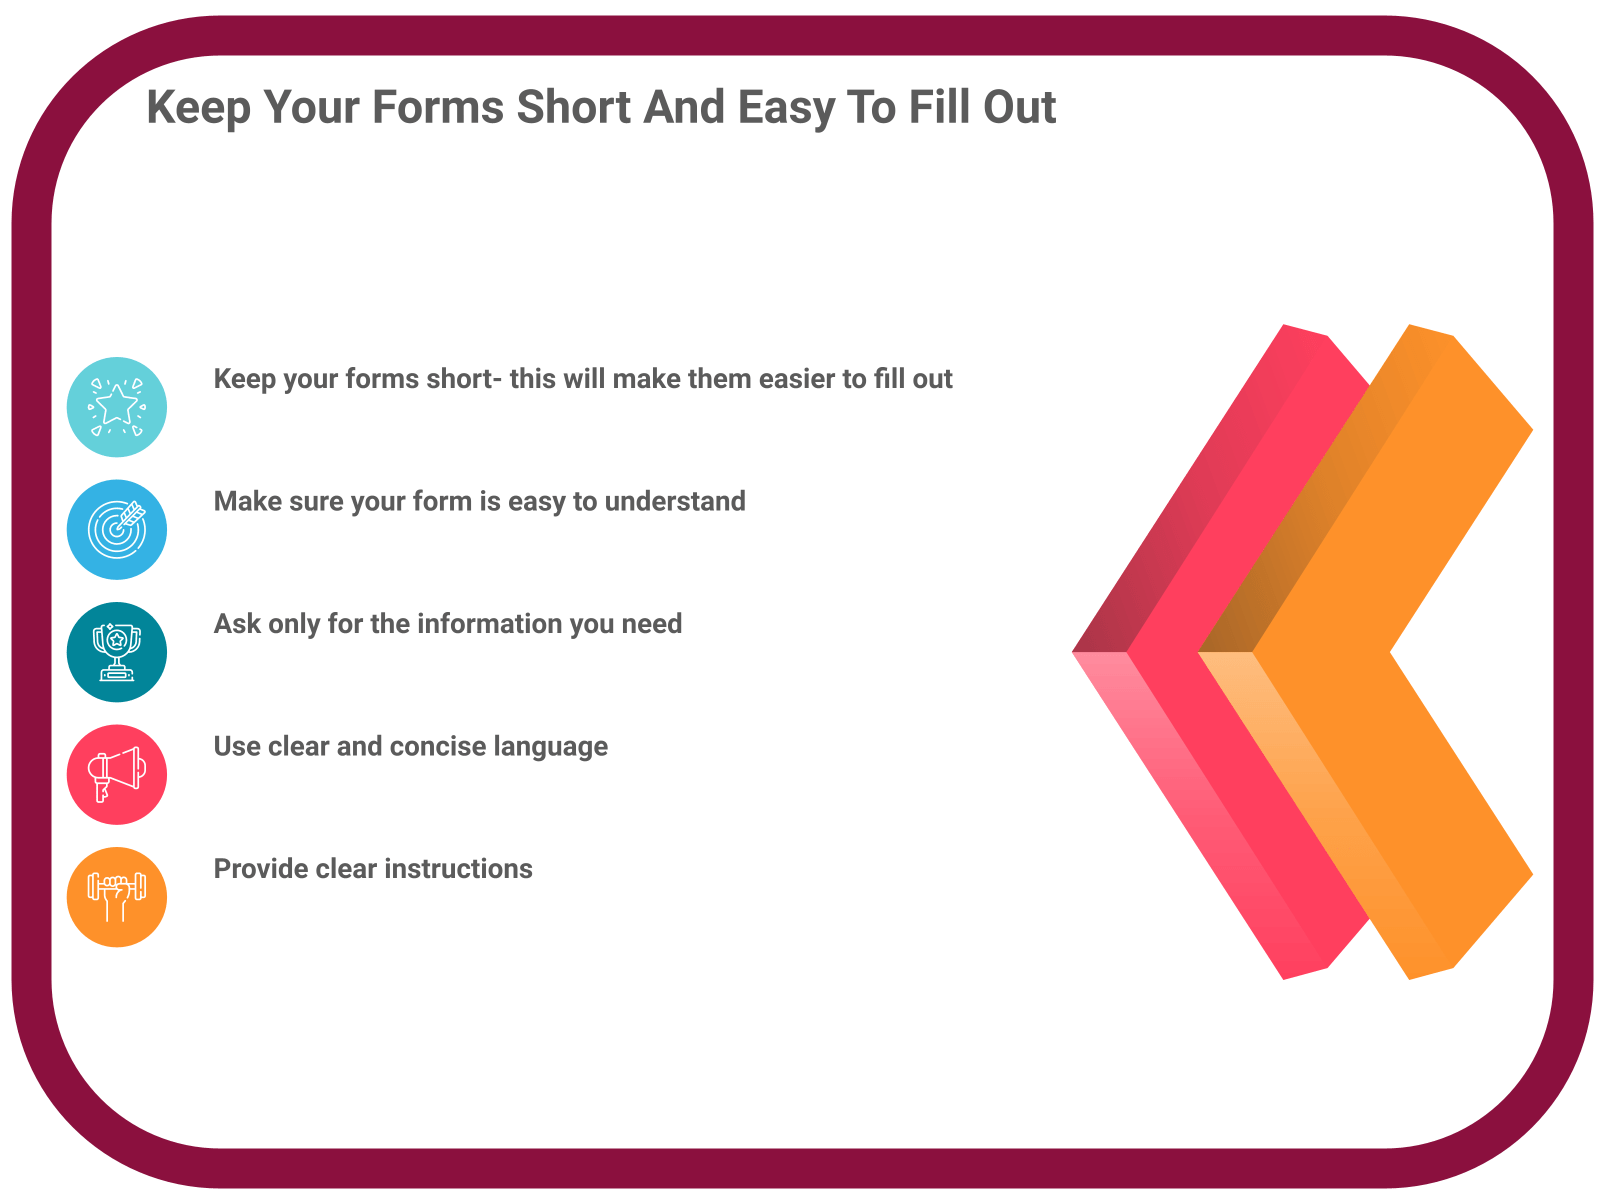 INFOGRAPHIC: Keep your forms short and easy to fill out - Poll the People